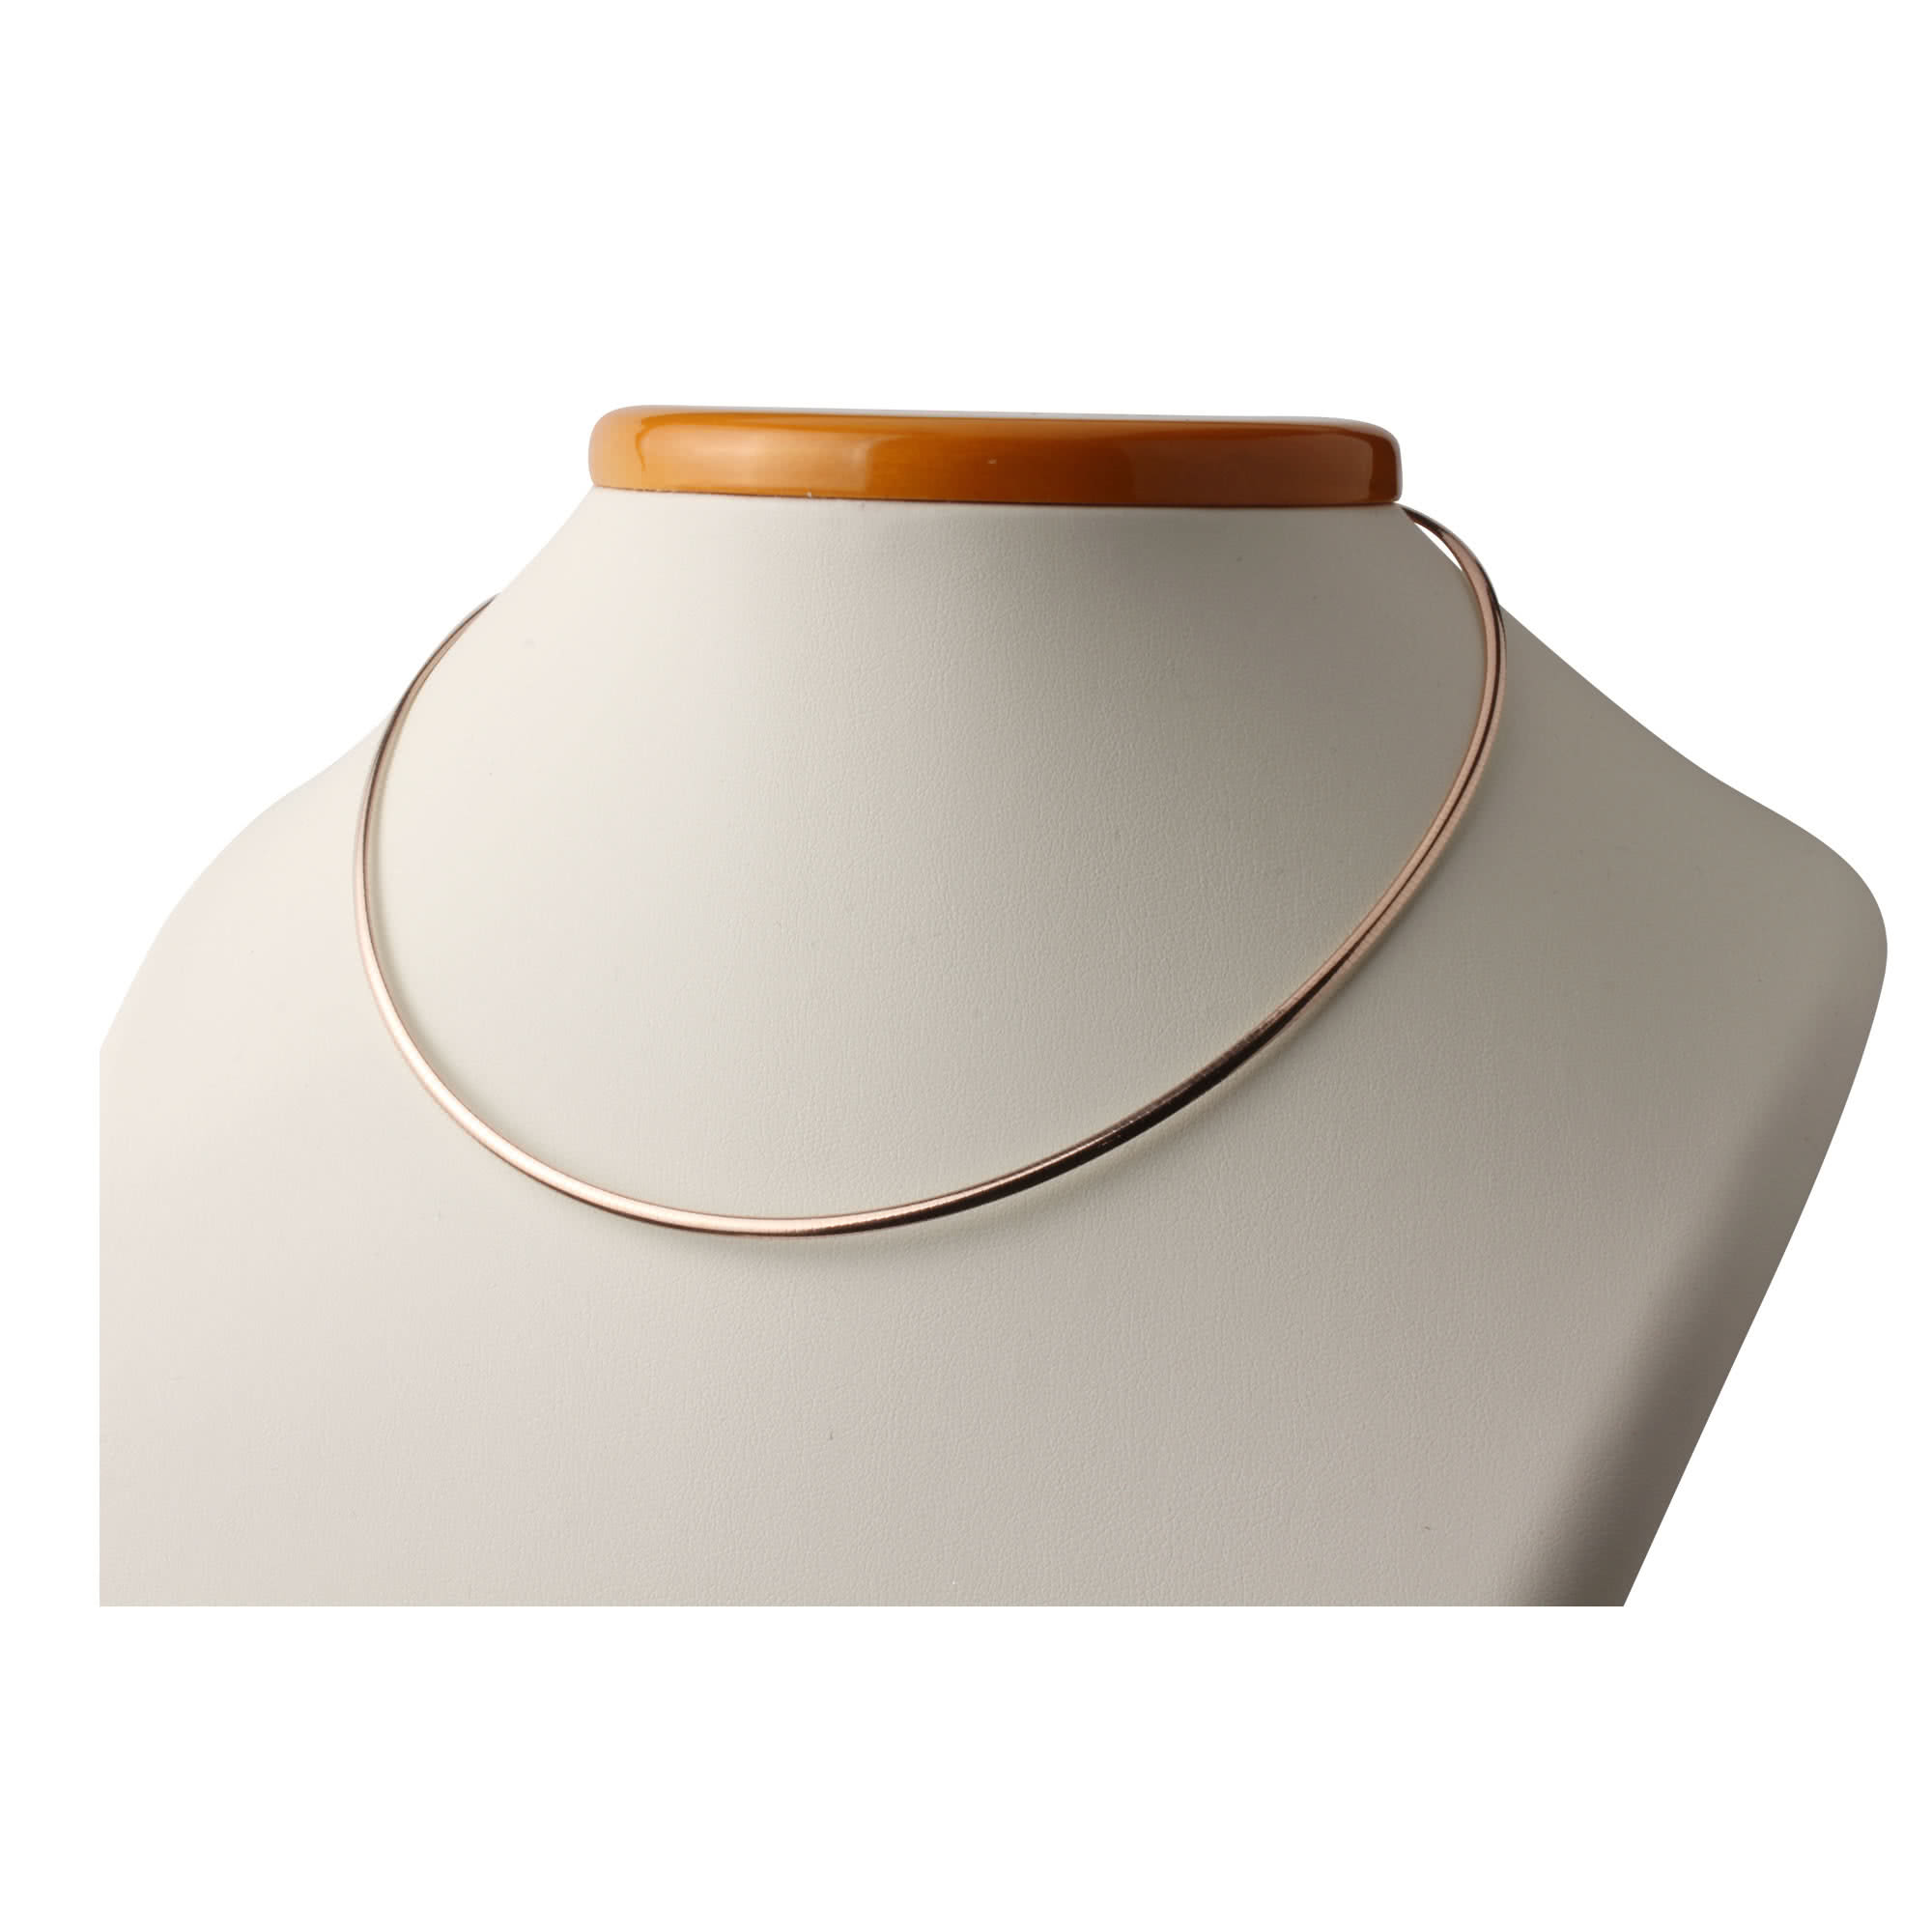 reversible gold and silver omega necklace